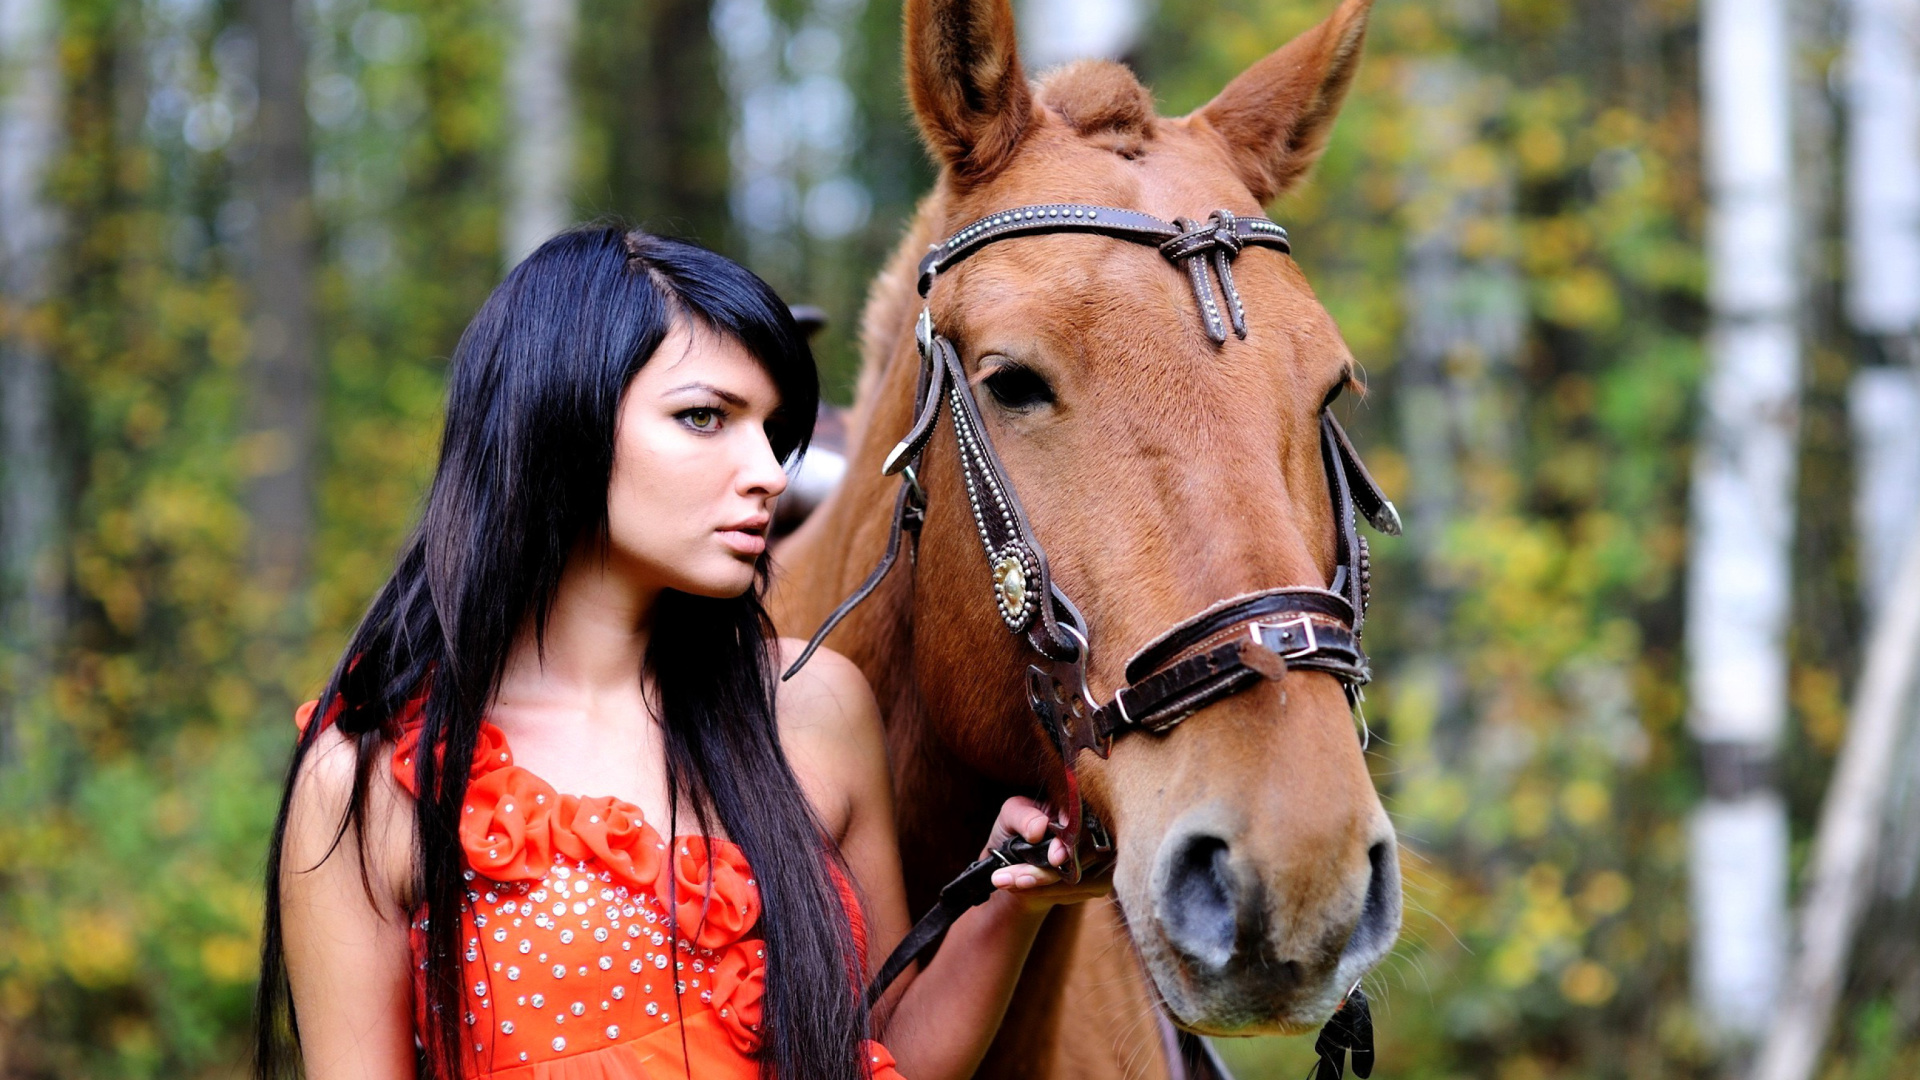 Girl with Horse wallpaper 1920x1080